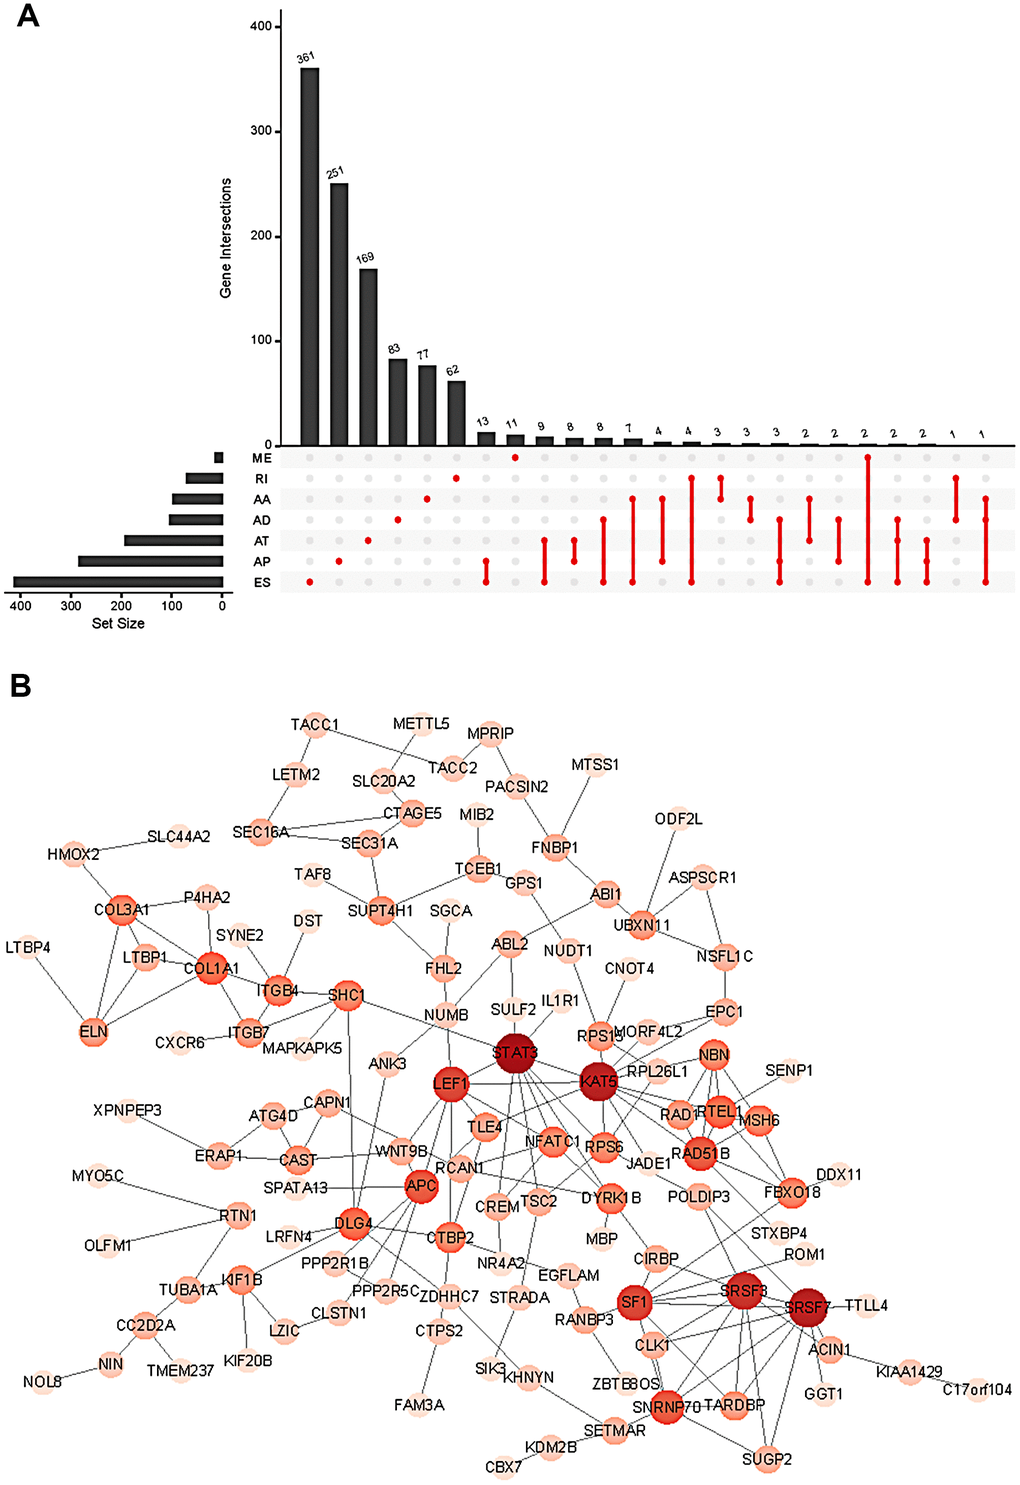 Summary (A) and protein network (B) of survival-associated AS events in the GC cohort.